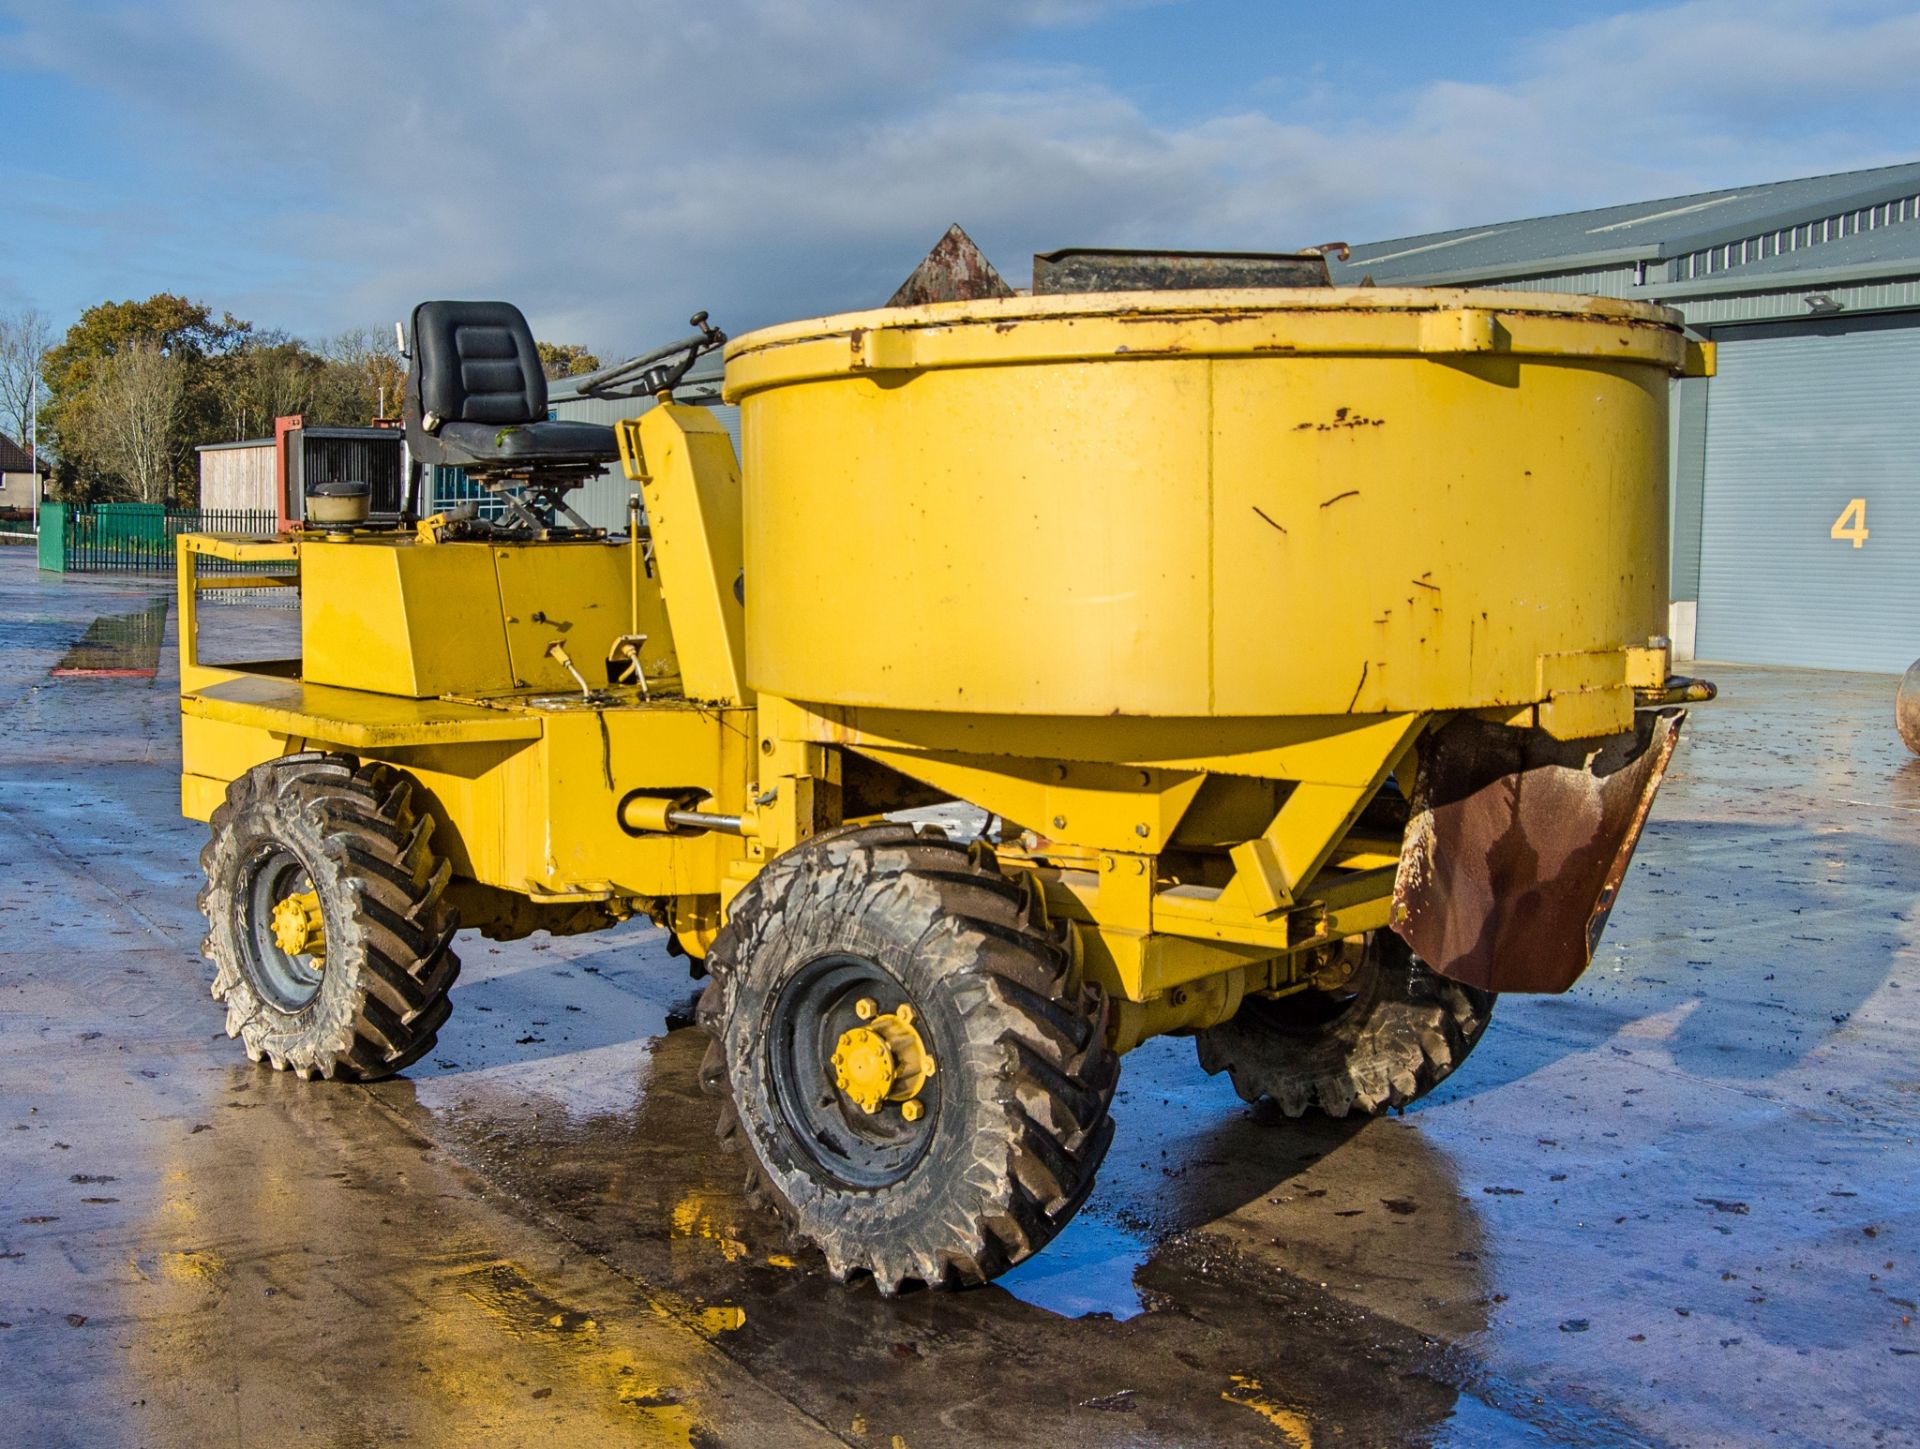 Mobile hydraulic pan mixer converted from a 3 tonne dumper - Image 2 of 19